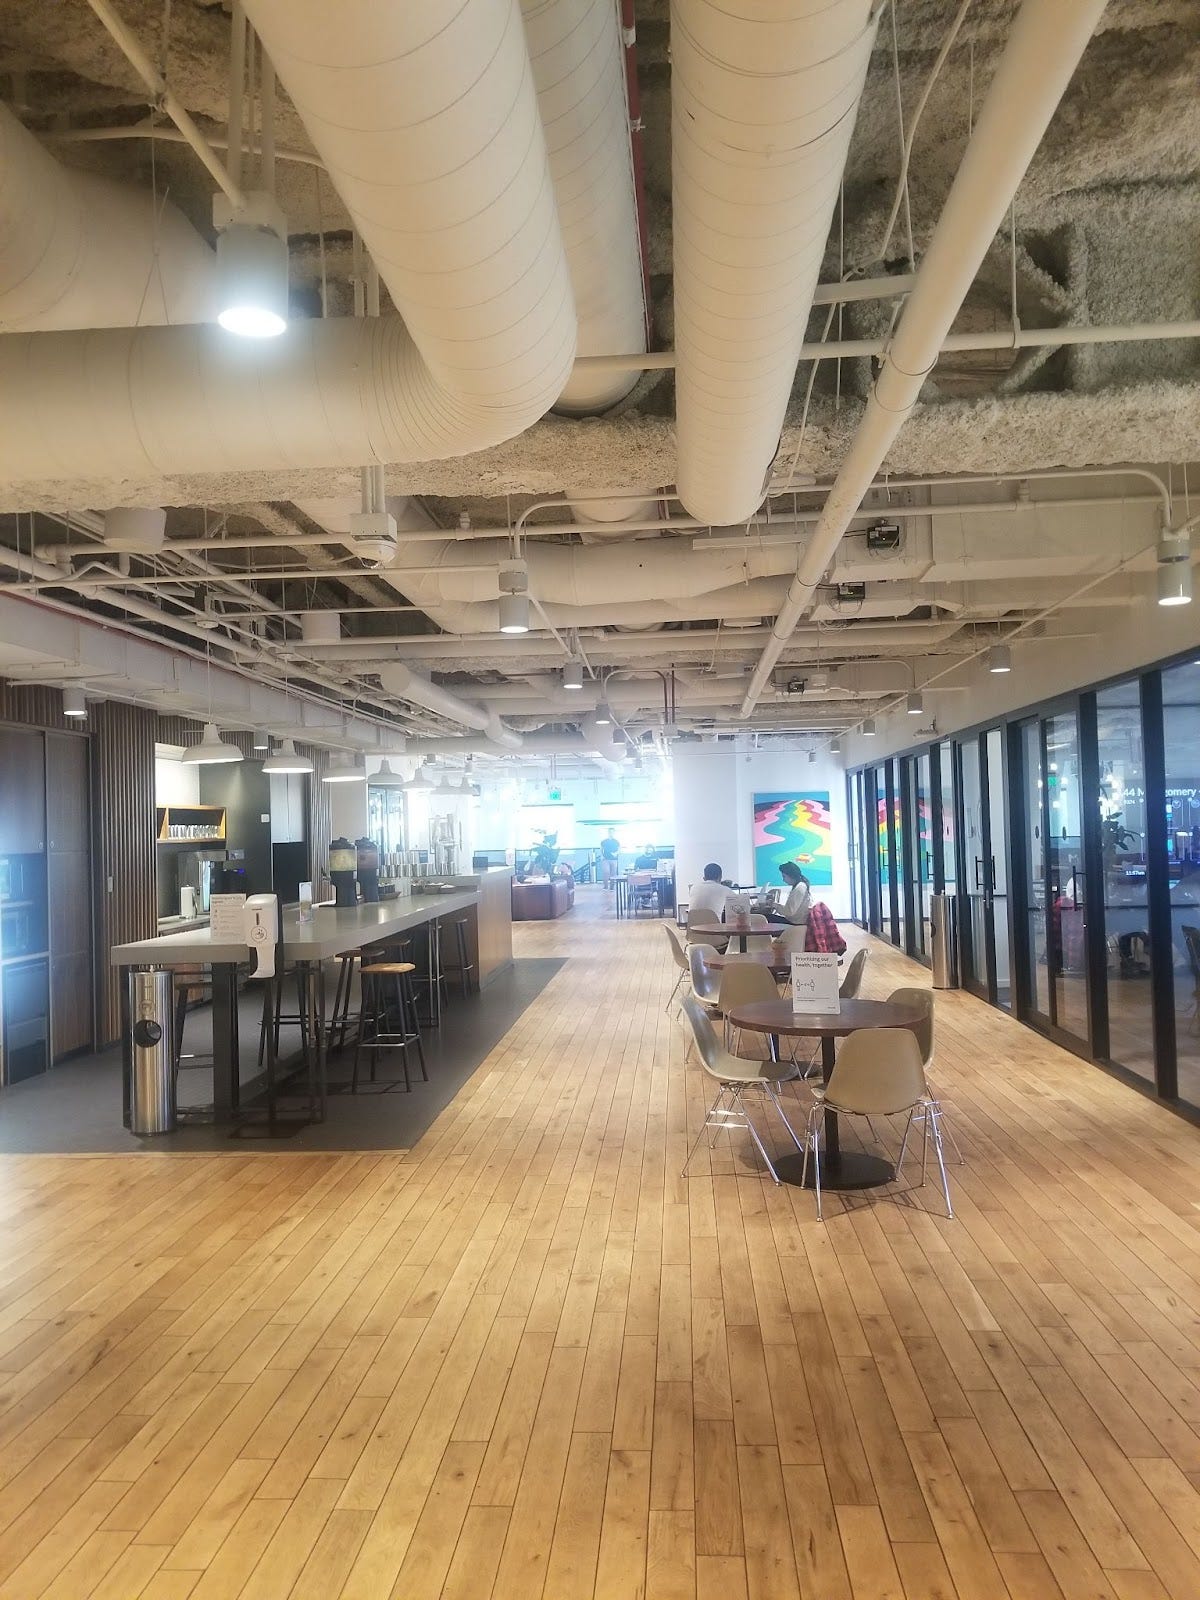 mostly empty wework office with kitchen, tables, and phone booths